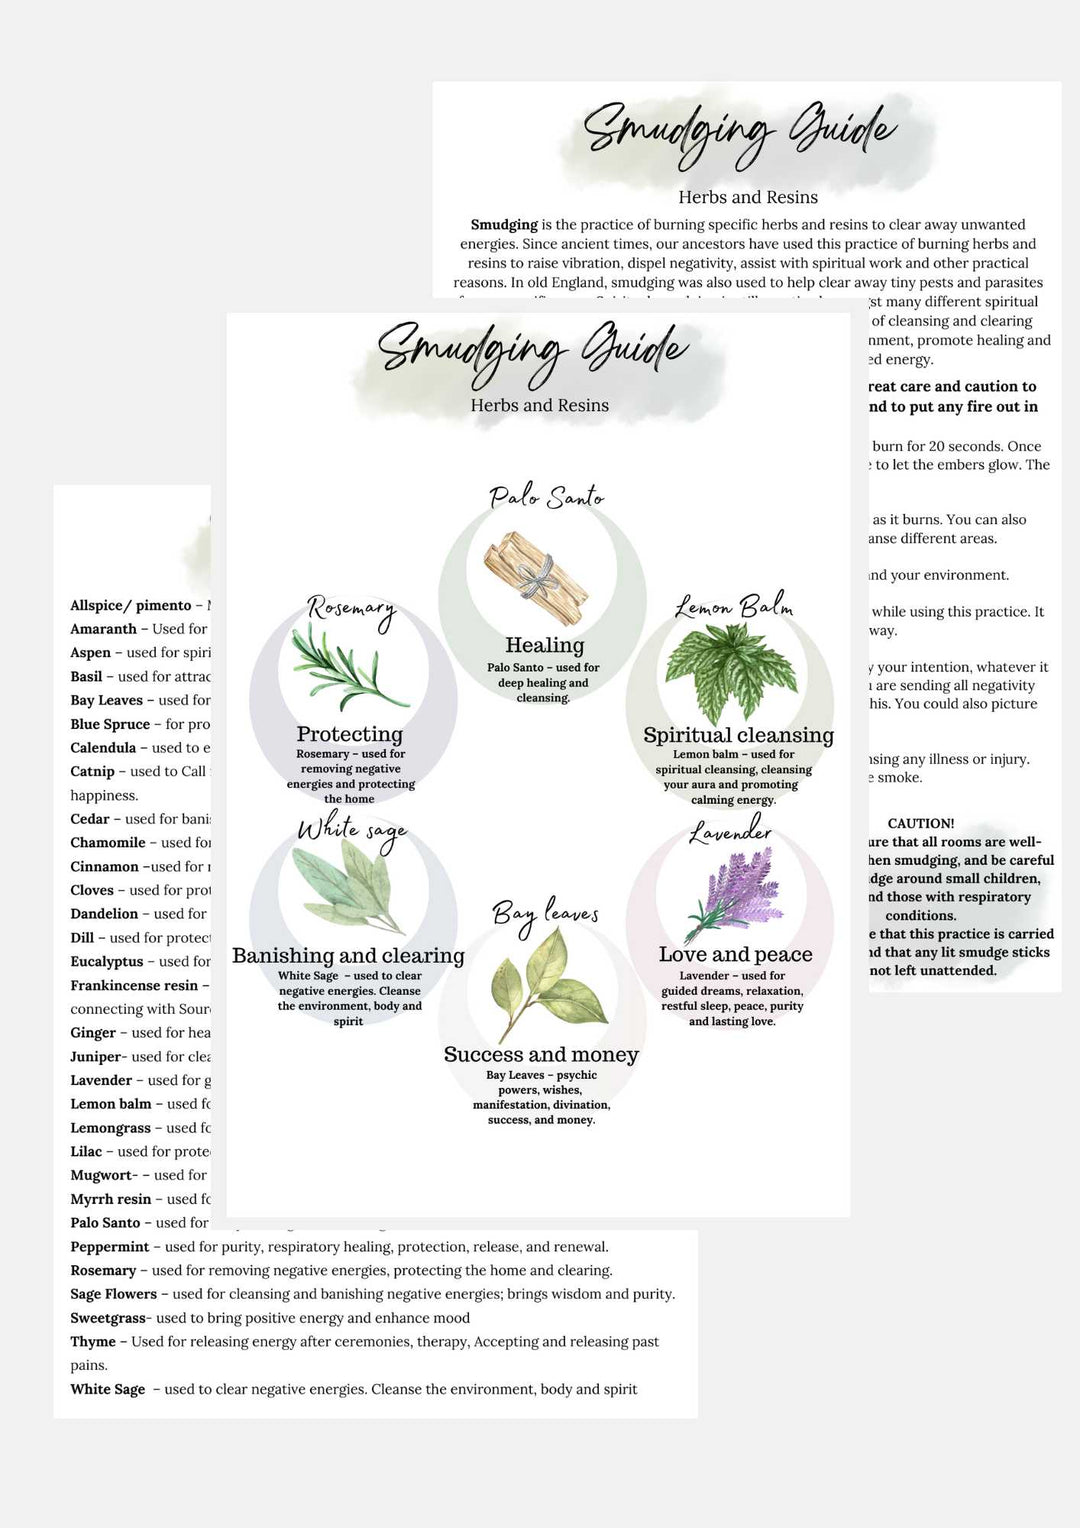 herbal smudging guide